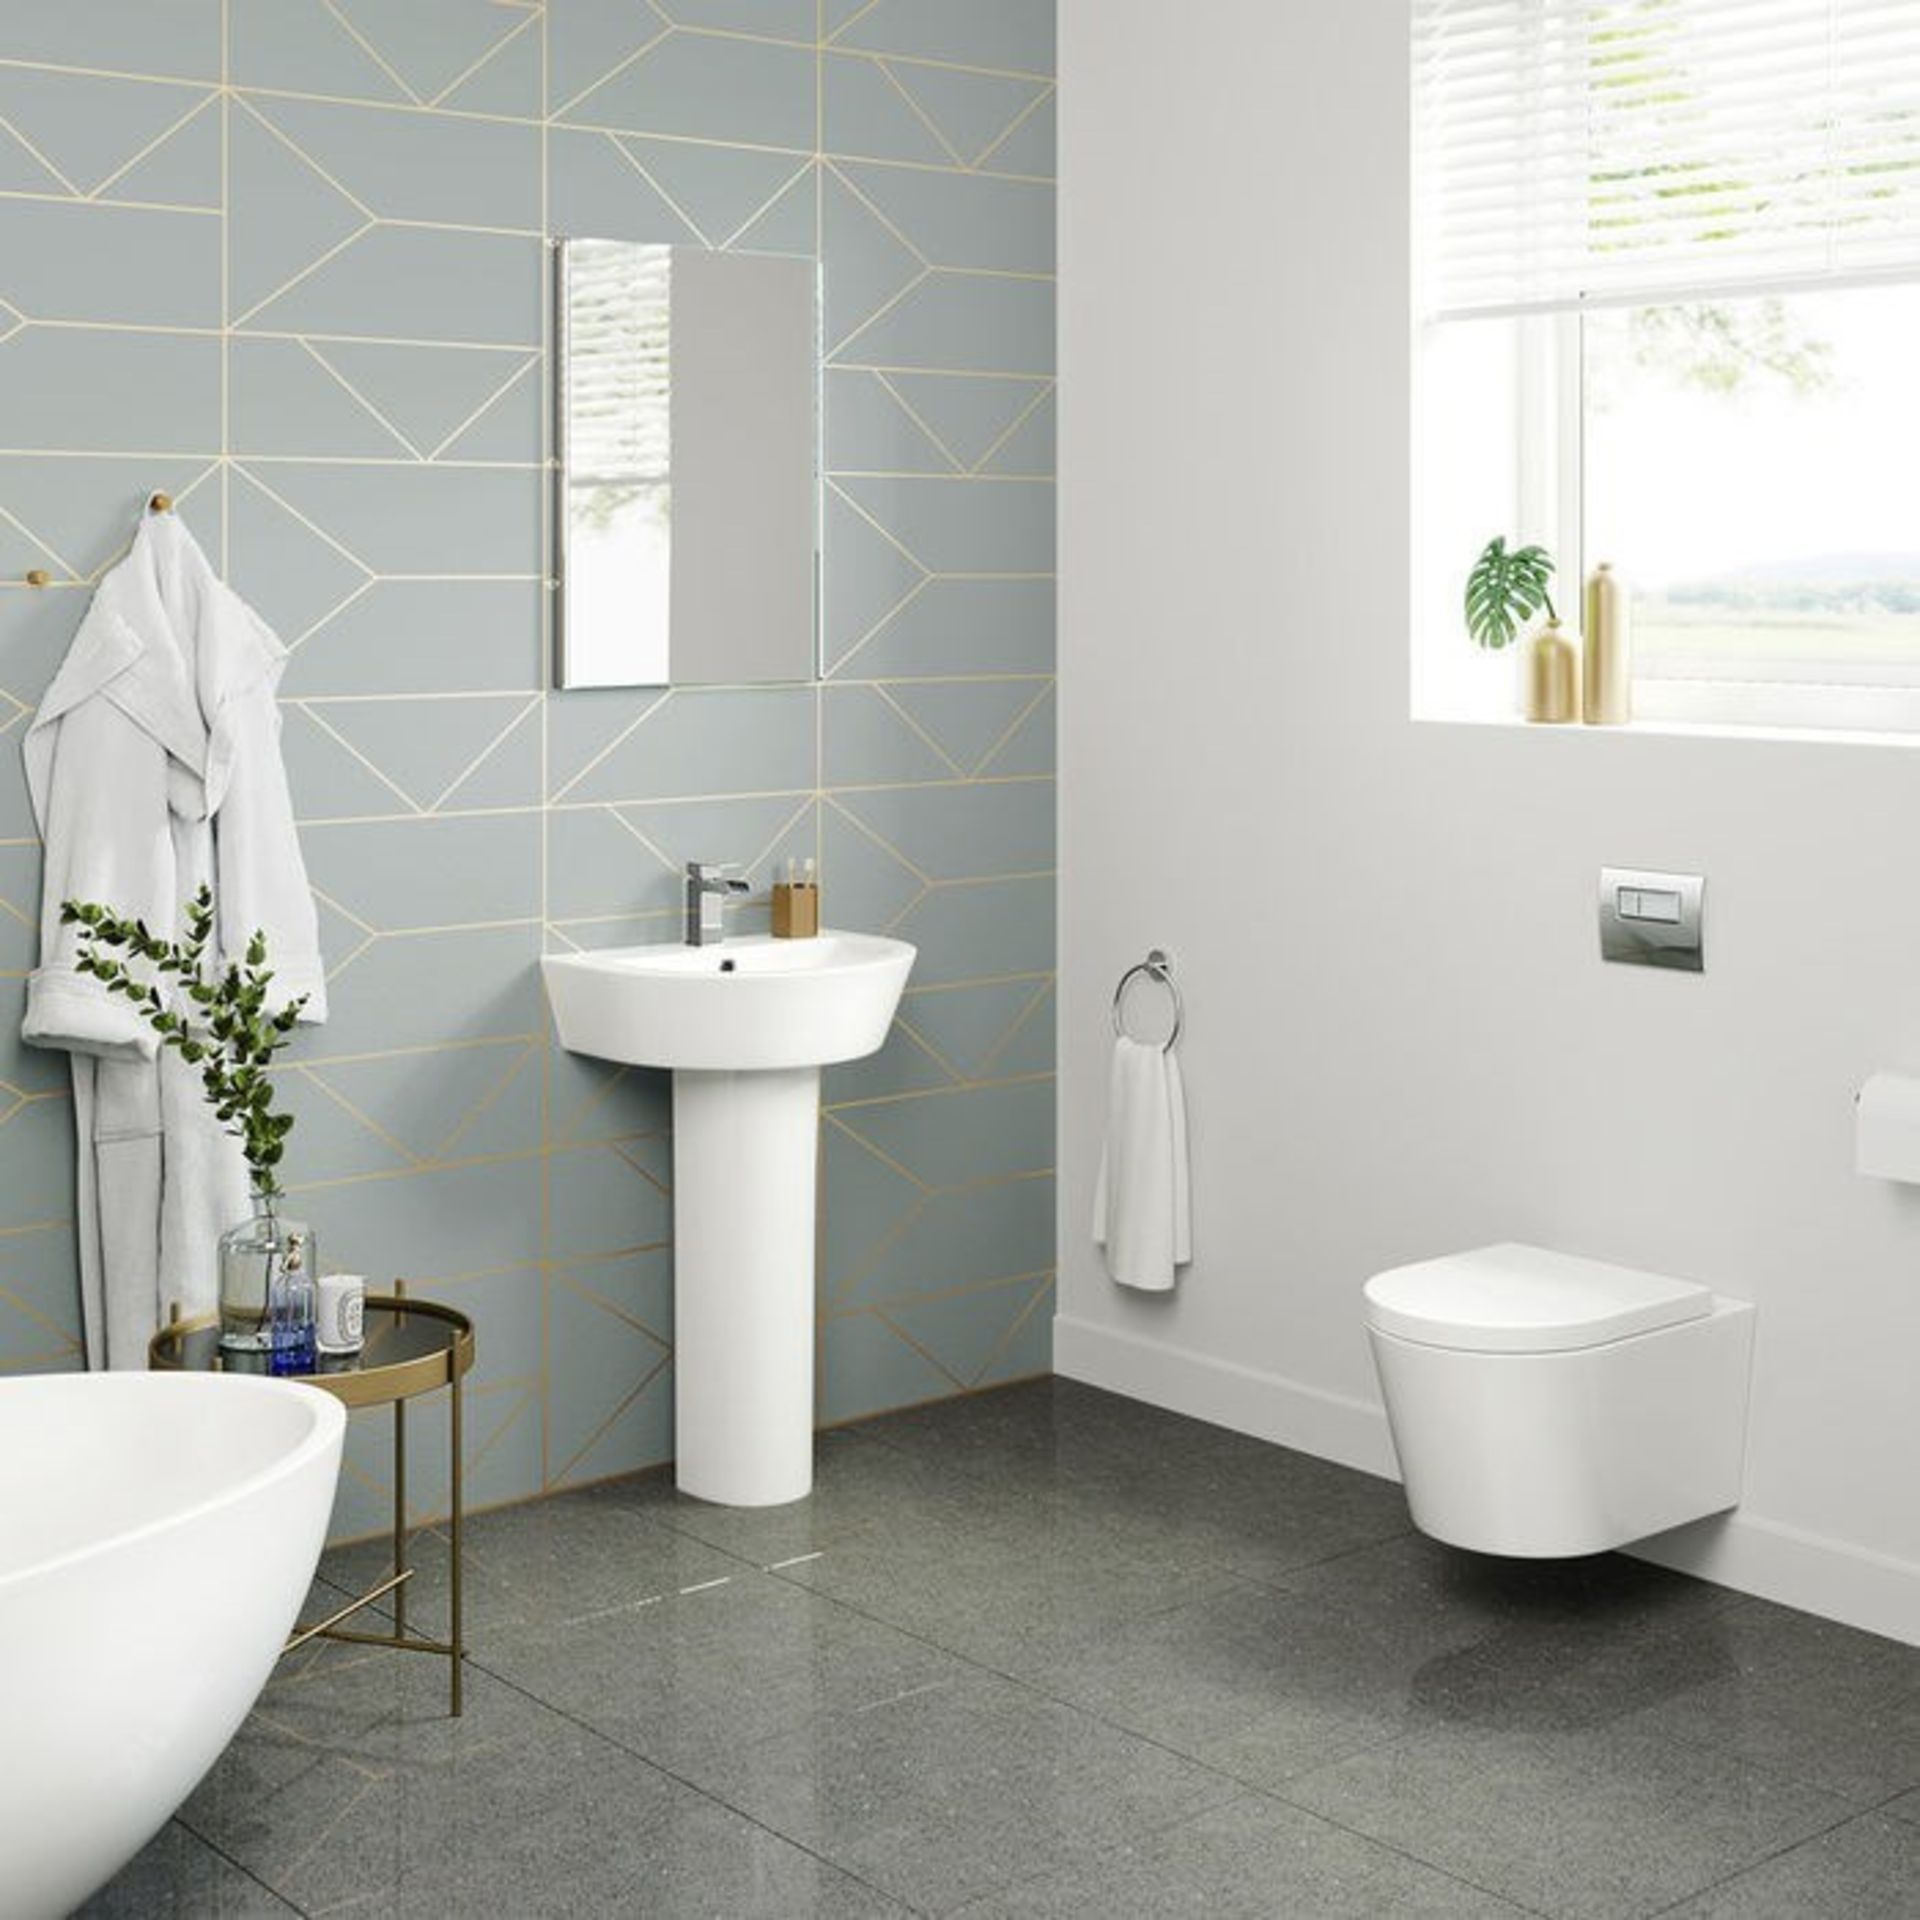 NEW & BOXED Lyon II Wall Hung Toilet inc Luxury Soft Close Seat.RRP £349.99 each. We love thi... - Image 2 of 2